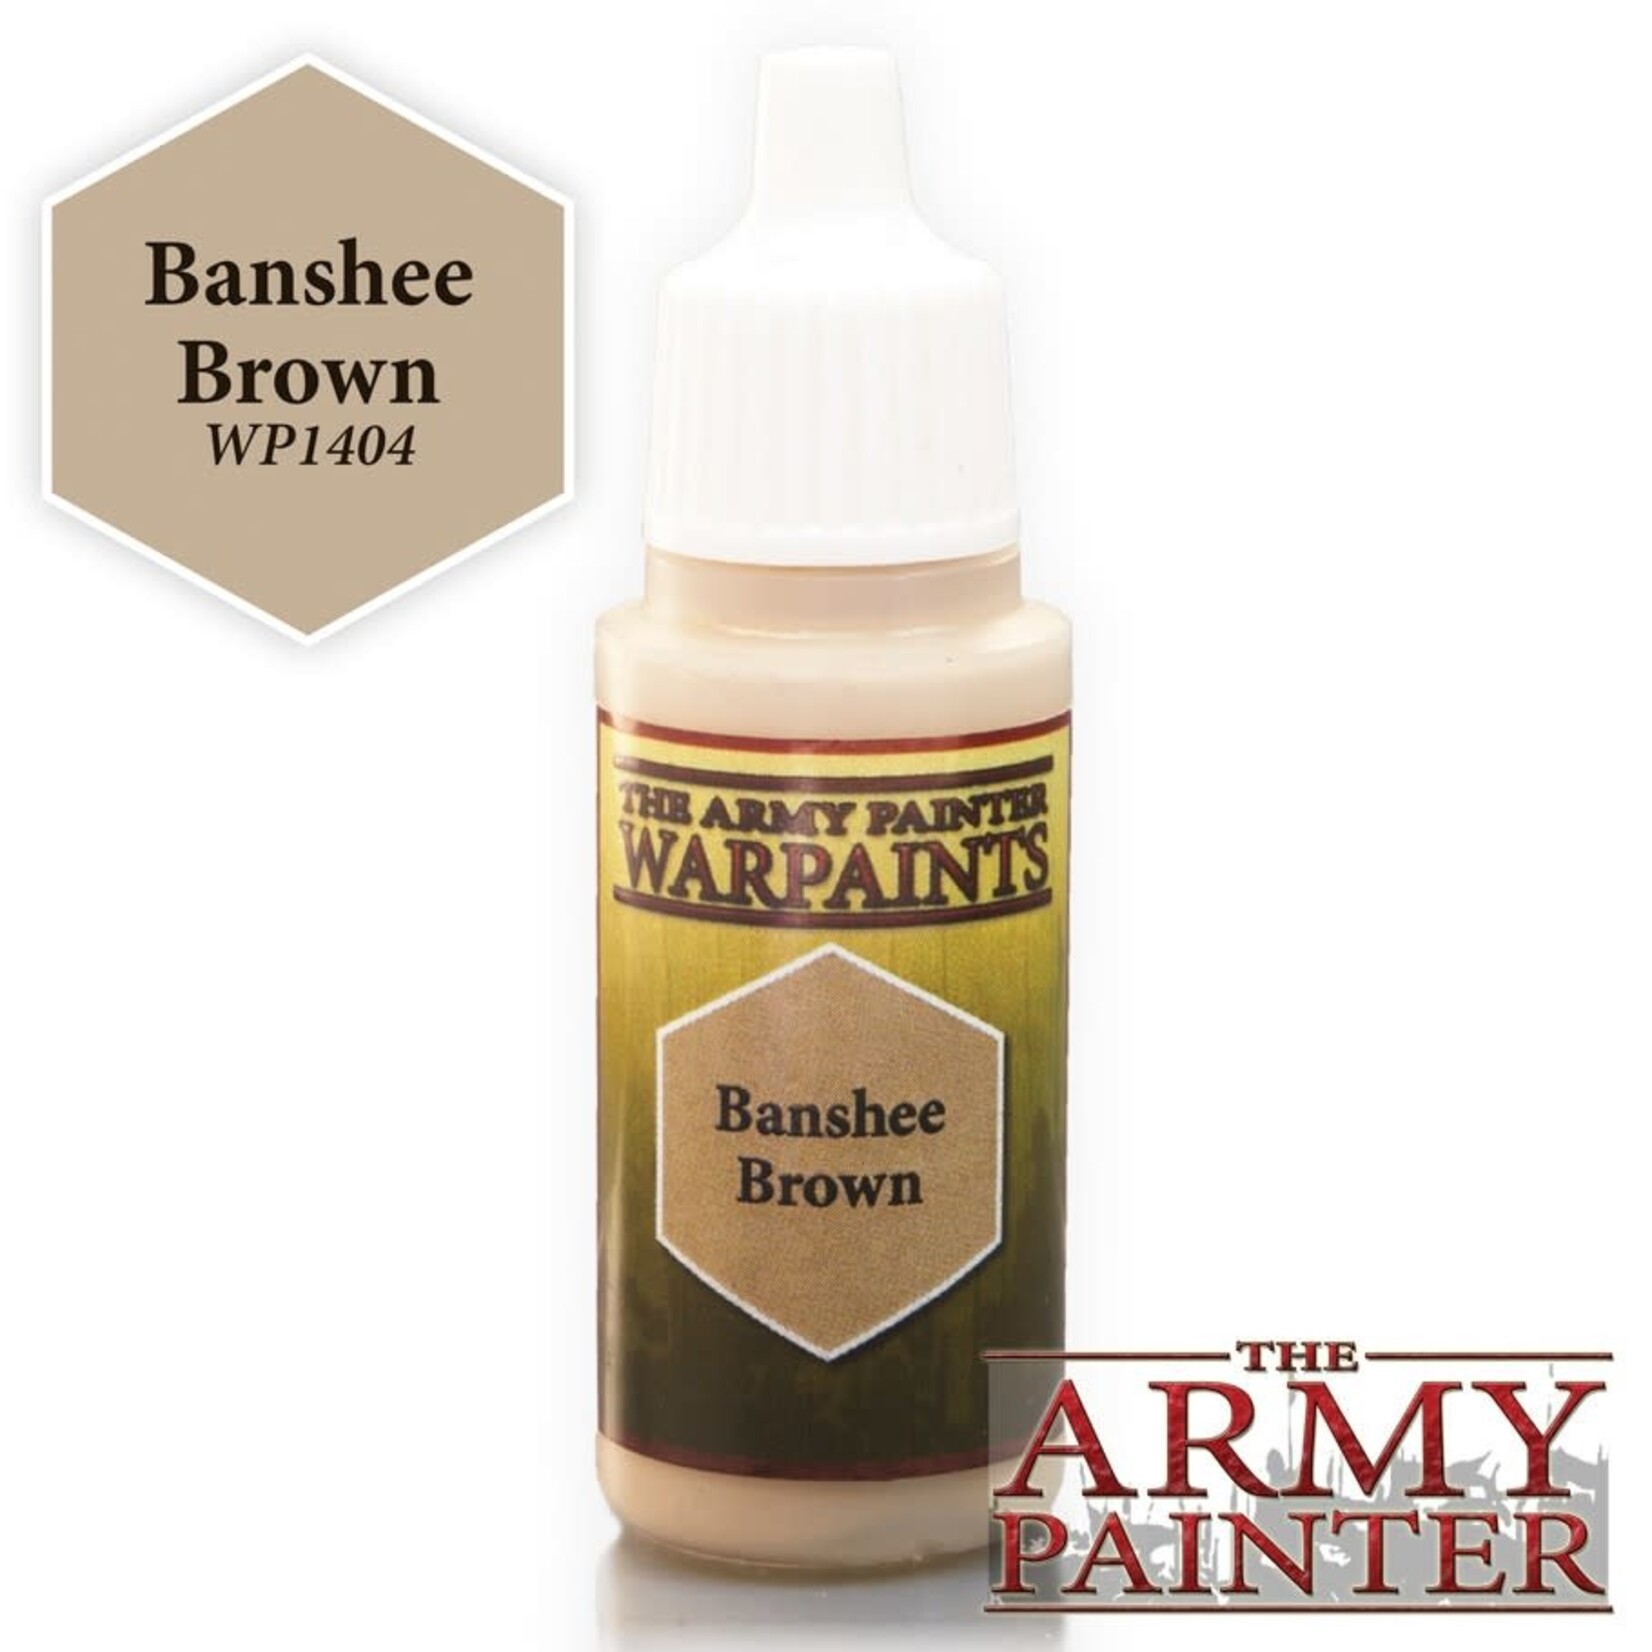 The Army Painter Warpaints: Banshee Brown